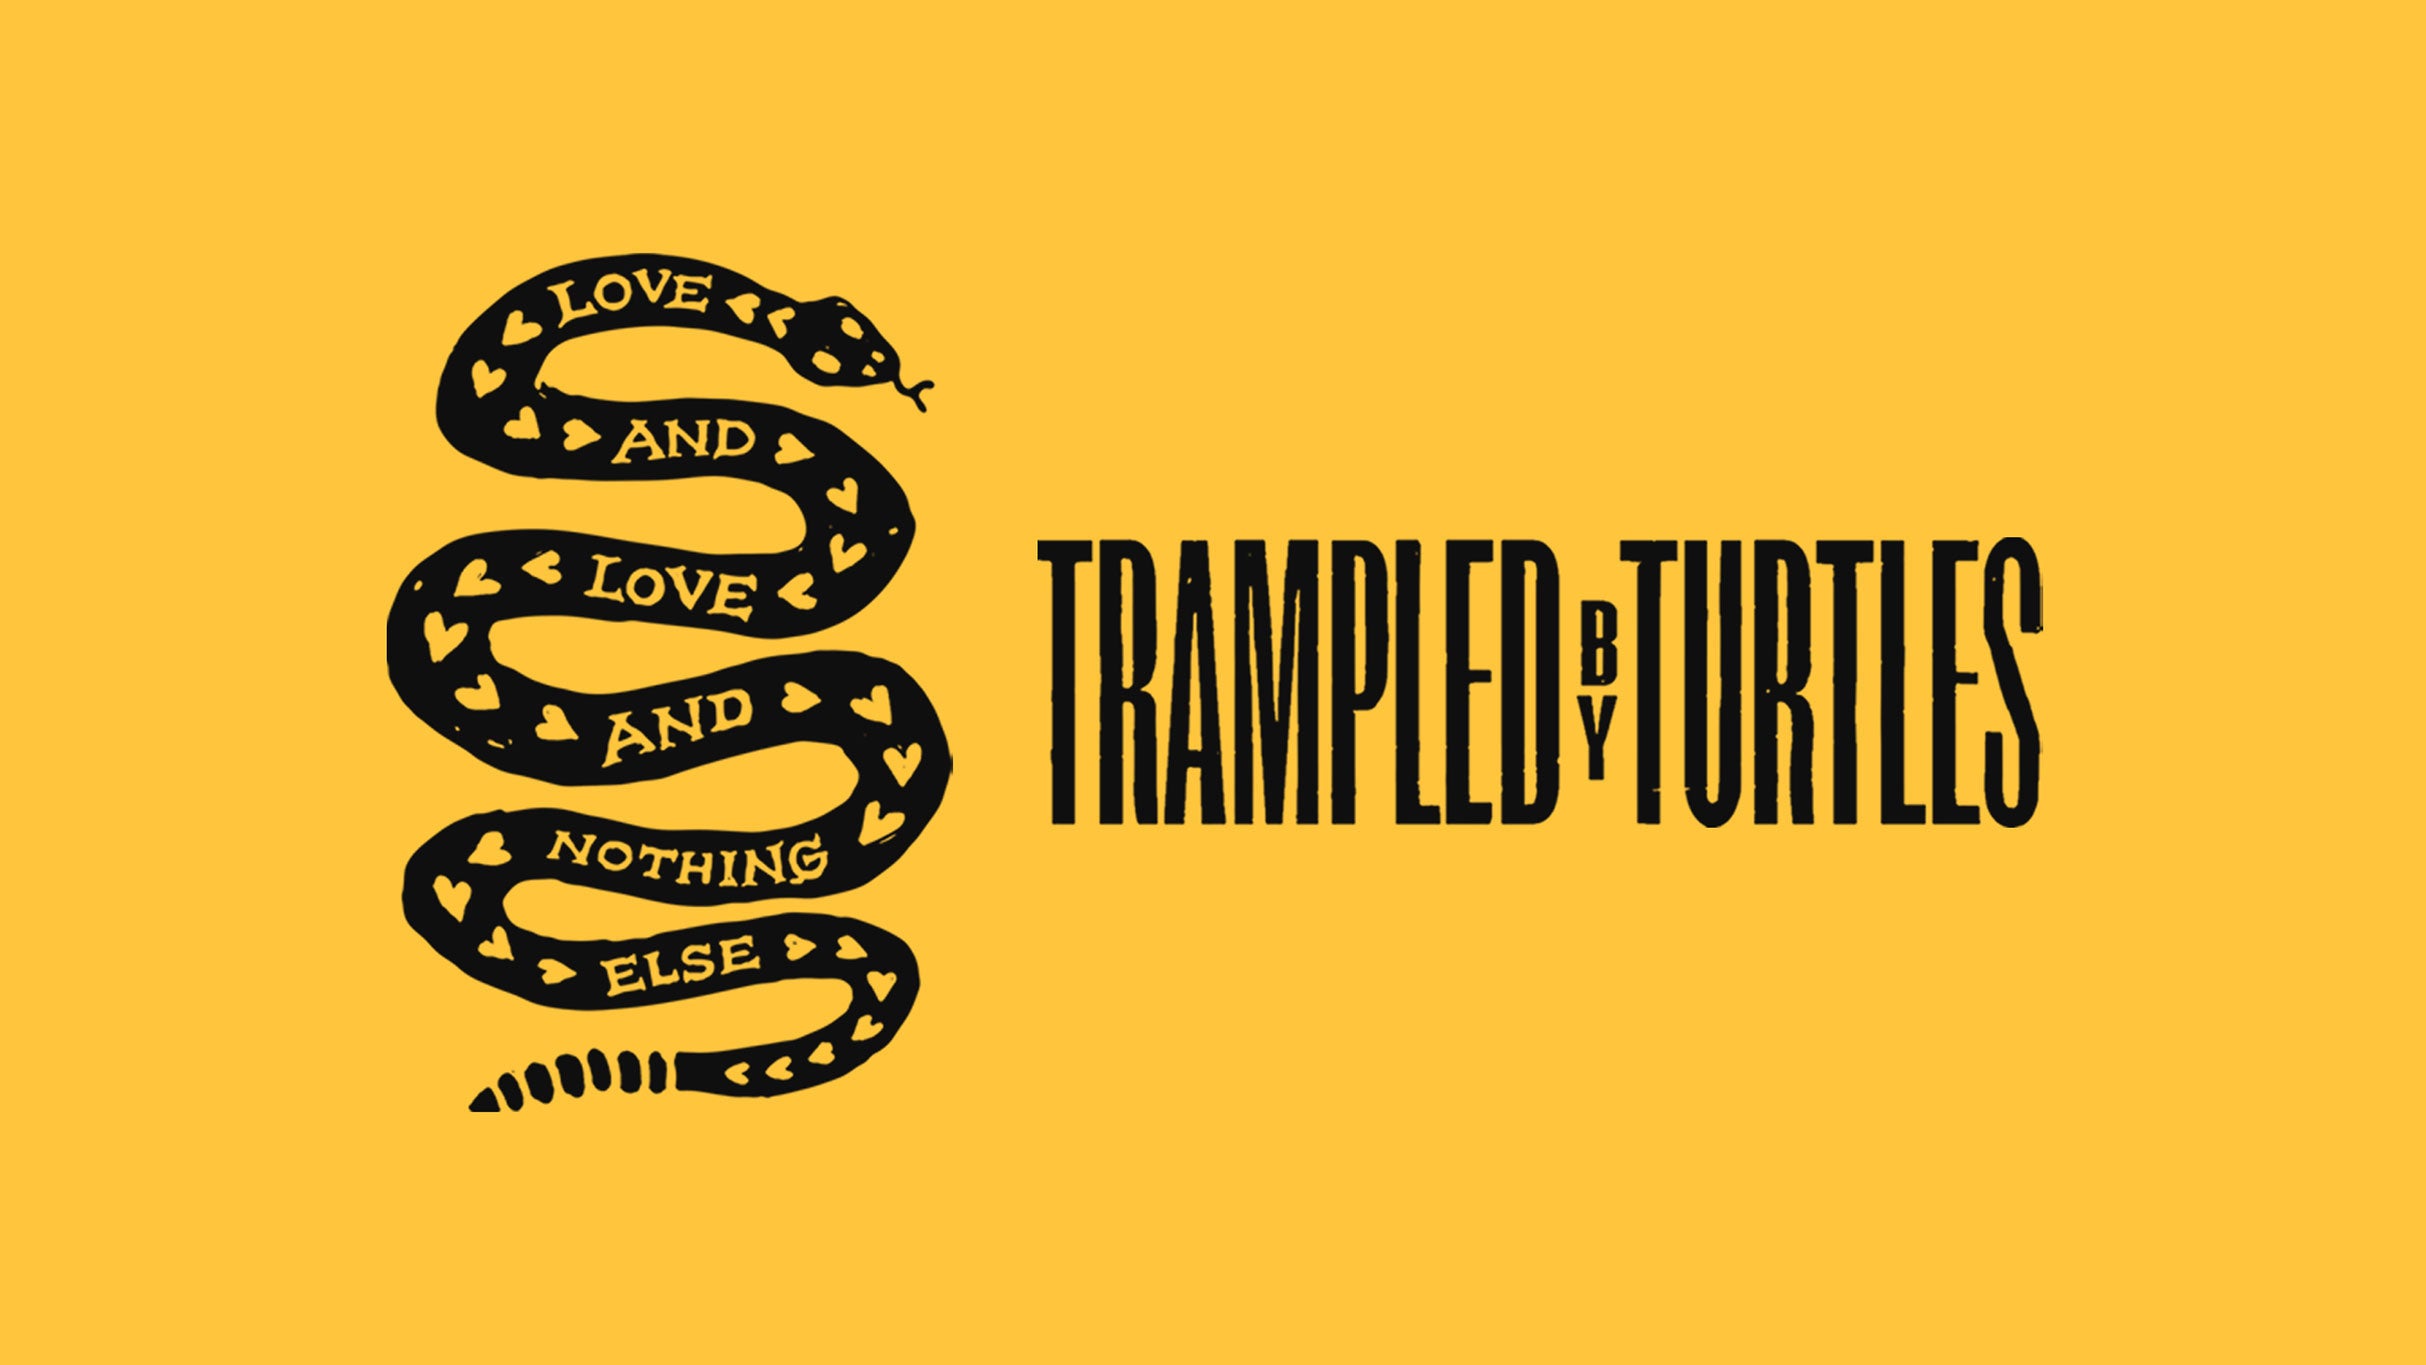 Trampled By Turtles at Dillon Amphitheater